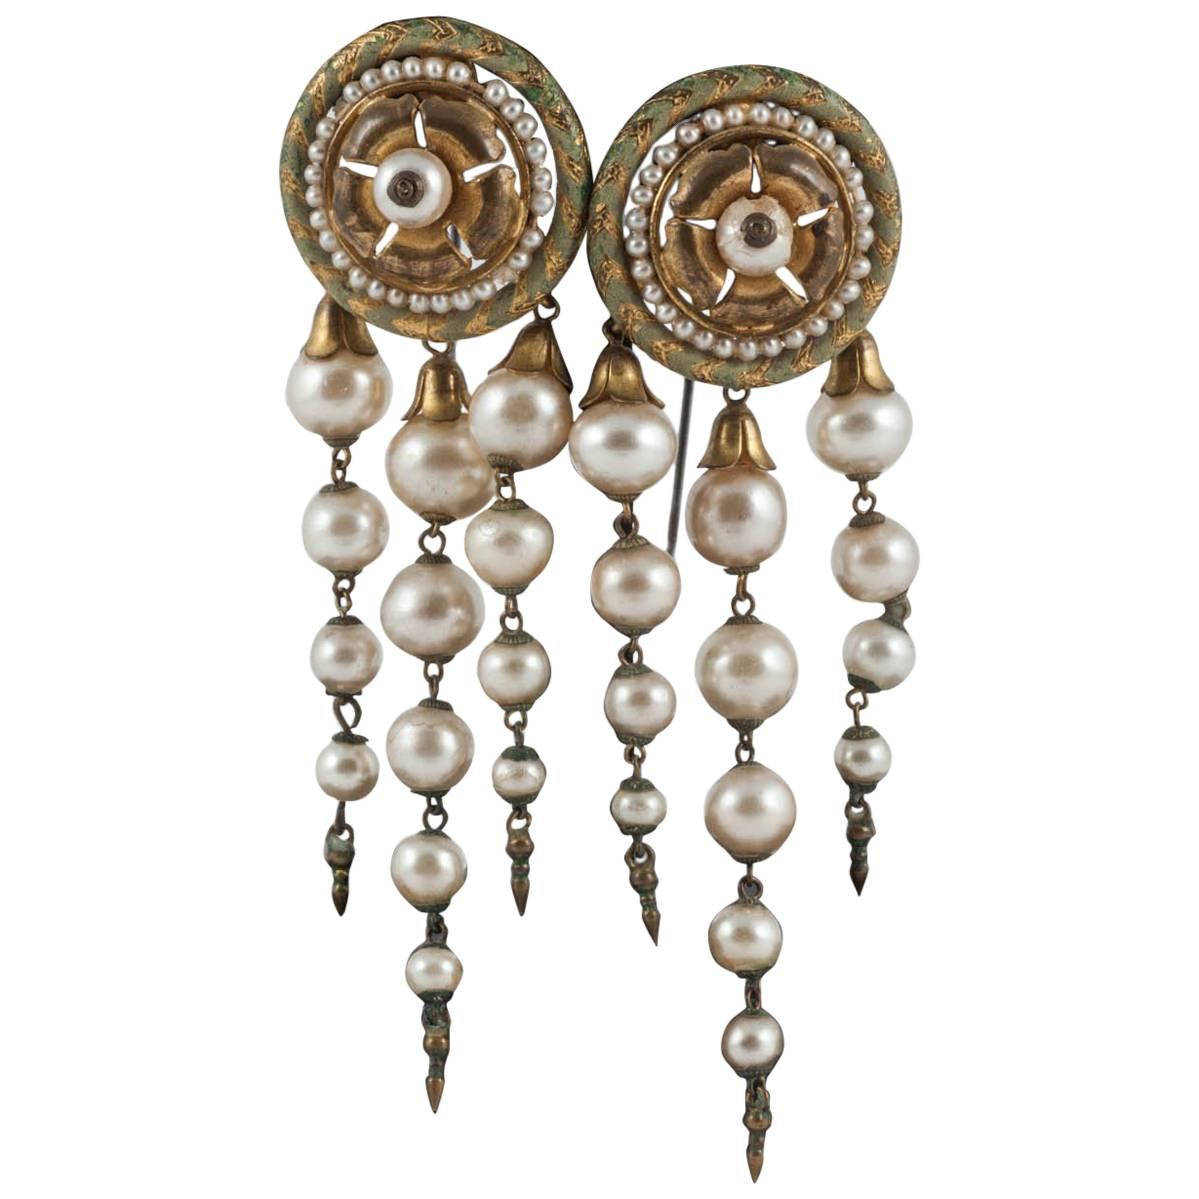 A pair of handblown glass pearl and enamelled gilt hat pins, 19th Century